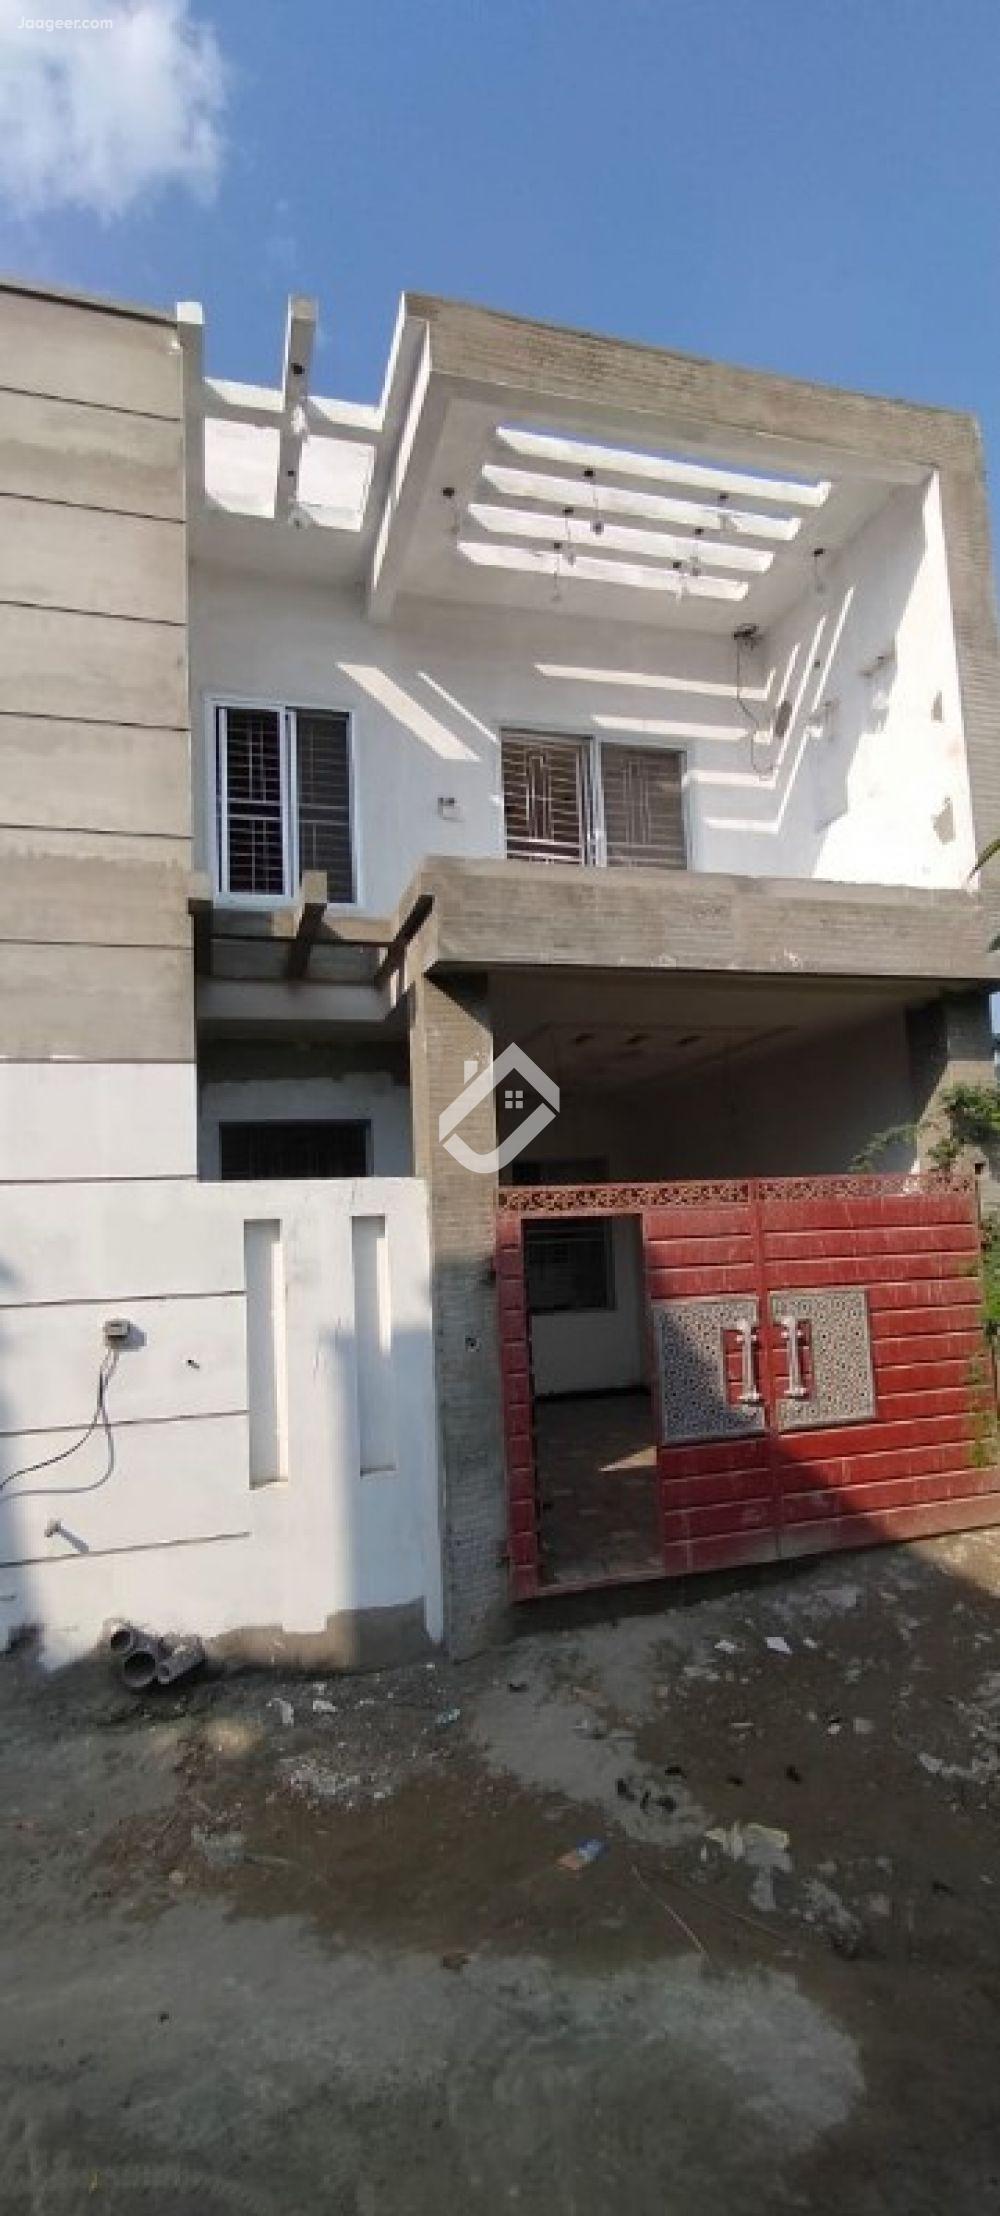 View  5.25 Marla Double Storey House For Rent In Murad Colony in Murad Colony, Sargodha